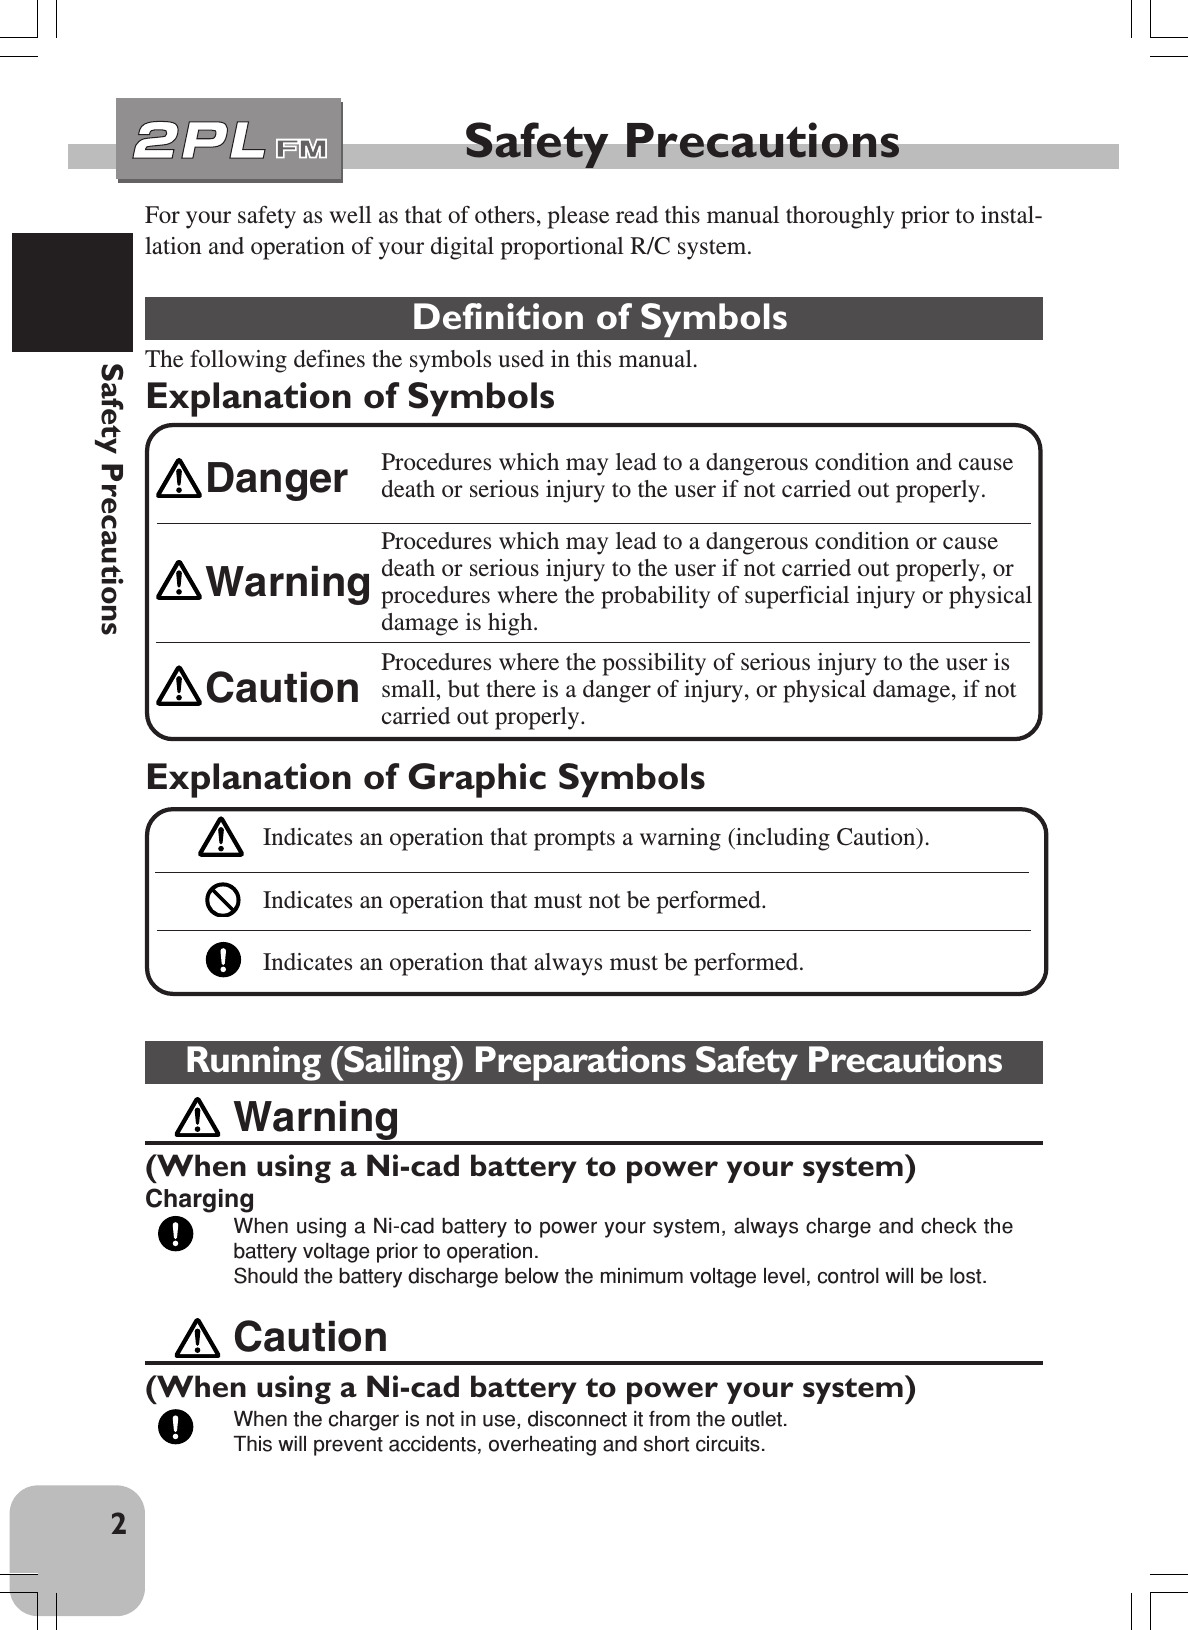 2Safety PrecautionsFor your safety as well as that of others, please read this manual thoroughly prior to instal-lation and operation of your digital proportional R/C system. Definition of SymbolsThe following defines the symbols used in this manual.Explanation of SymbolsSafety PrecautionsCaution(When using a Ni-cad battery to power your system)When the charger is not in use, disconnect it from the outlet.This will prevent accidents, overheating and short circuits.Running (Sailing) Preparations Safety PrecautionsWarning(When using a Ni-cad battery to power your system)ChargingWhen using a Ni-cad battery to power your system, always charge and check thebattery voltage prior to operation.Should the battery discharge below the minimum voltage level, control will be lost.Explanation of Graphic SymbolsIndicates an operation that prompts a warning (including Caution).Indicates an operation that must not be performed.Indicates an operation that always must be performed.Procedures which may lead to a dangerous condition and causedeath or serious injury to the user if not carried out properly.Procedures which may lead to a dangerous condition or causedeath or serious injury to the user if not carried out properly, orprocedures where the probability of superficial injury or physicaldamage is high.Procedures where the possibility of serious injury to the user issmall, but there is a danger of injury, or physical damage, if notcarried out properly.WarningCautionDanger